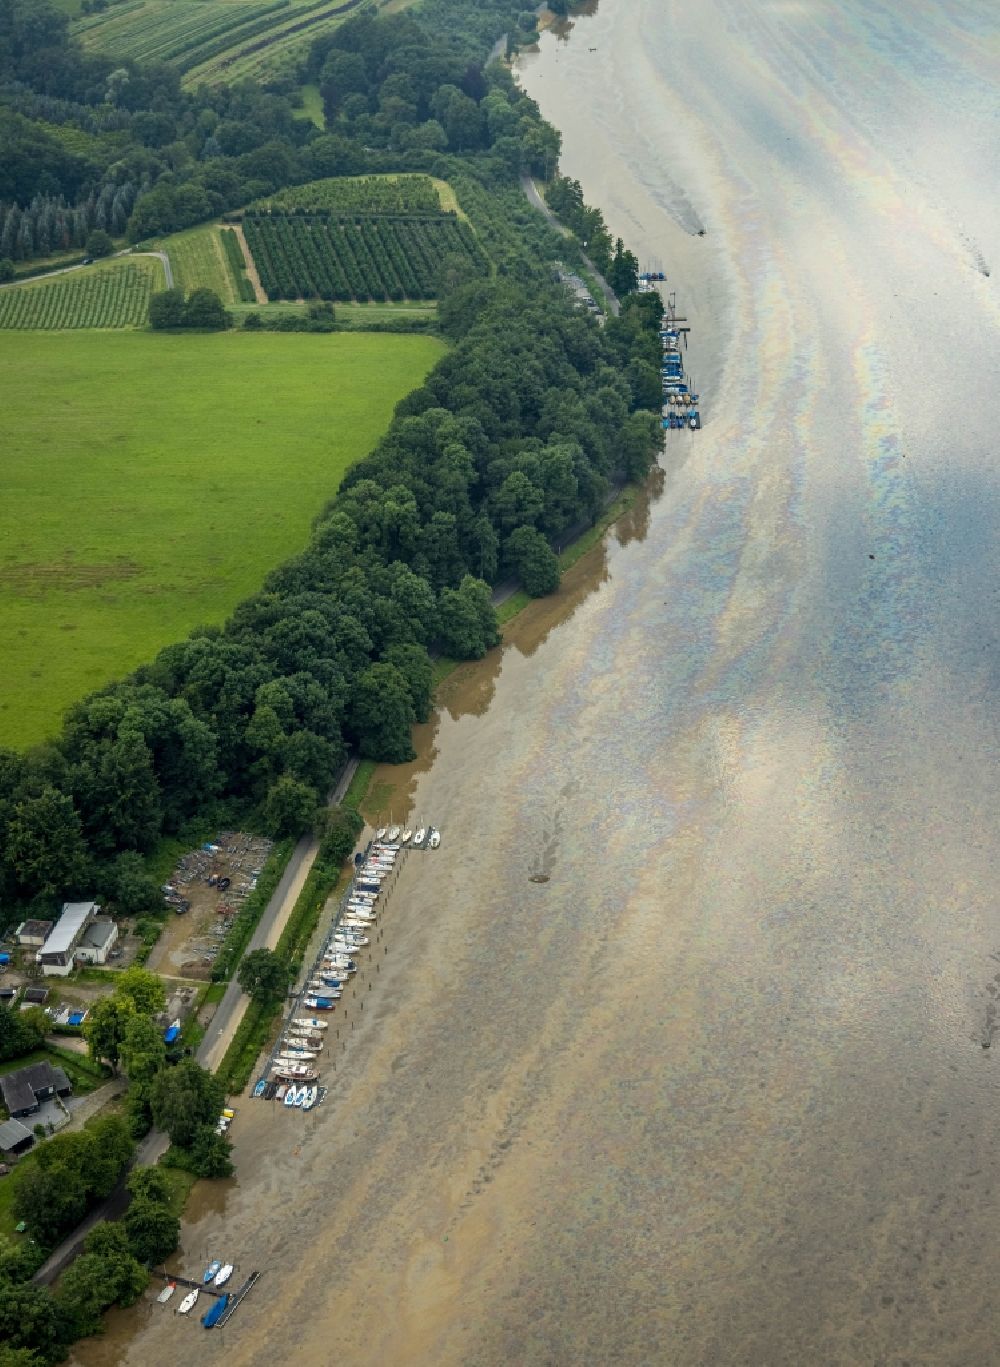 Aerial photograph Essen - Flood situation of the inundating, all-moving and infrastructure-destroying brown water masses with extensive oil spill on the water surface of the Baldeneysee in the district Bredeney in Essen in the Ruhr area in the state North Rhine-Westphalia, Germany